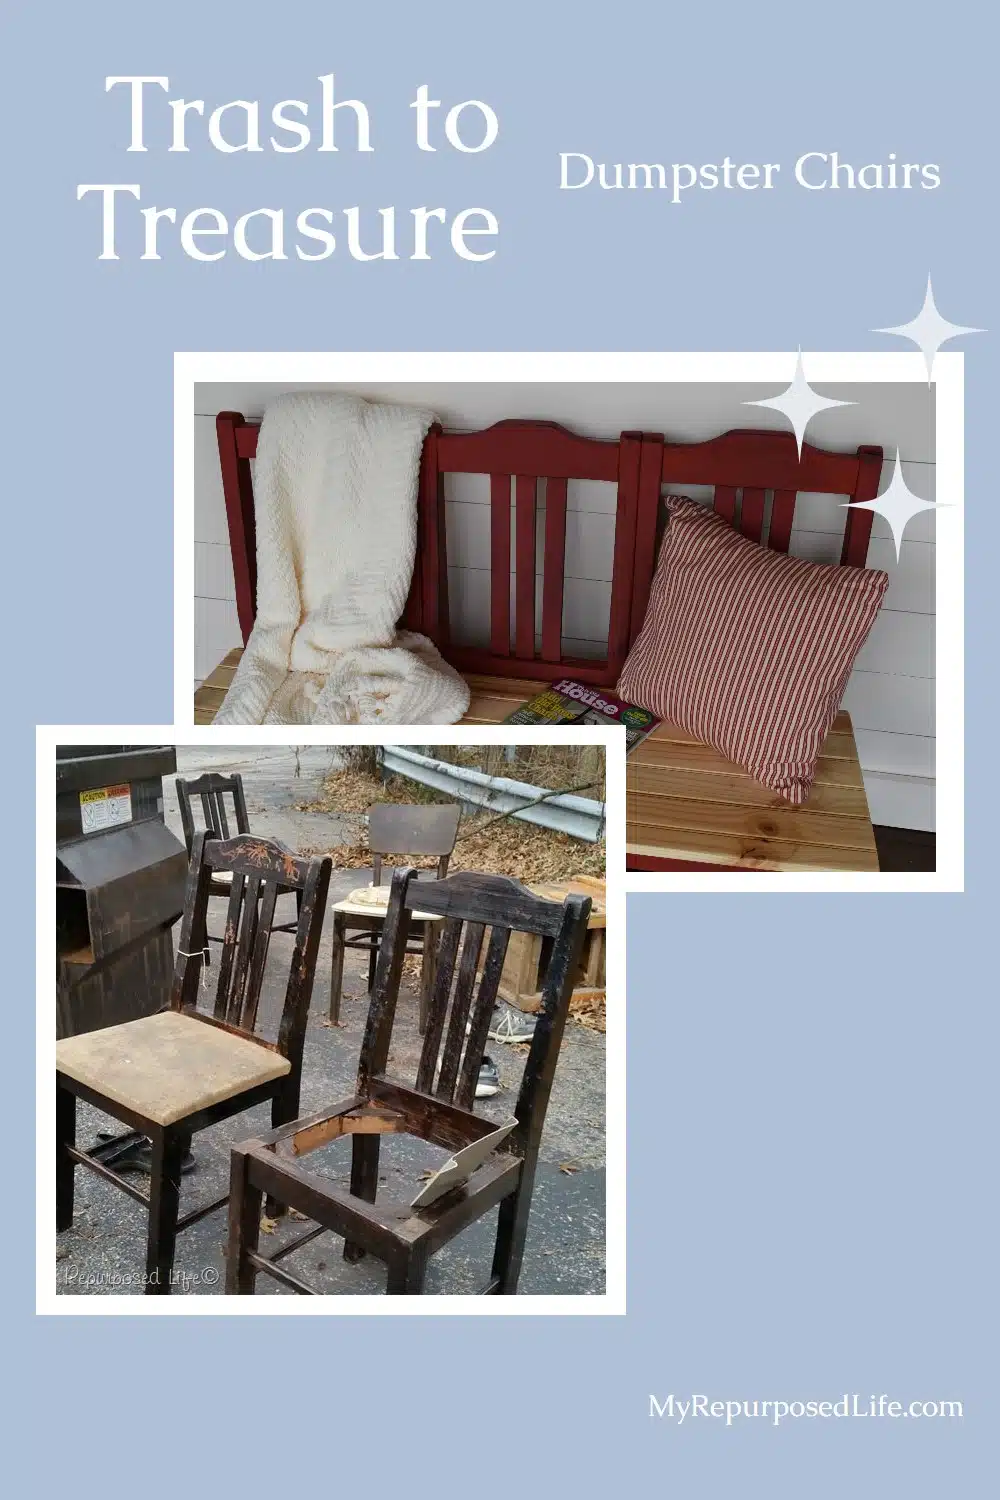 How to make a bench from three dumpster chairs. Easiest chair bench tutorial you will find. How did I get the perfect red? All the details included for you. #MyRepurposedLife #repurposed #furniture #chair #bench #tutorial #diy via @repurposedlife